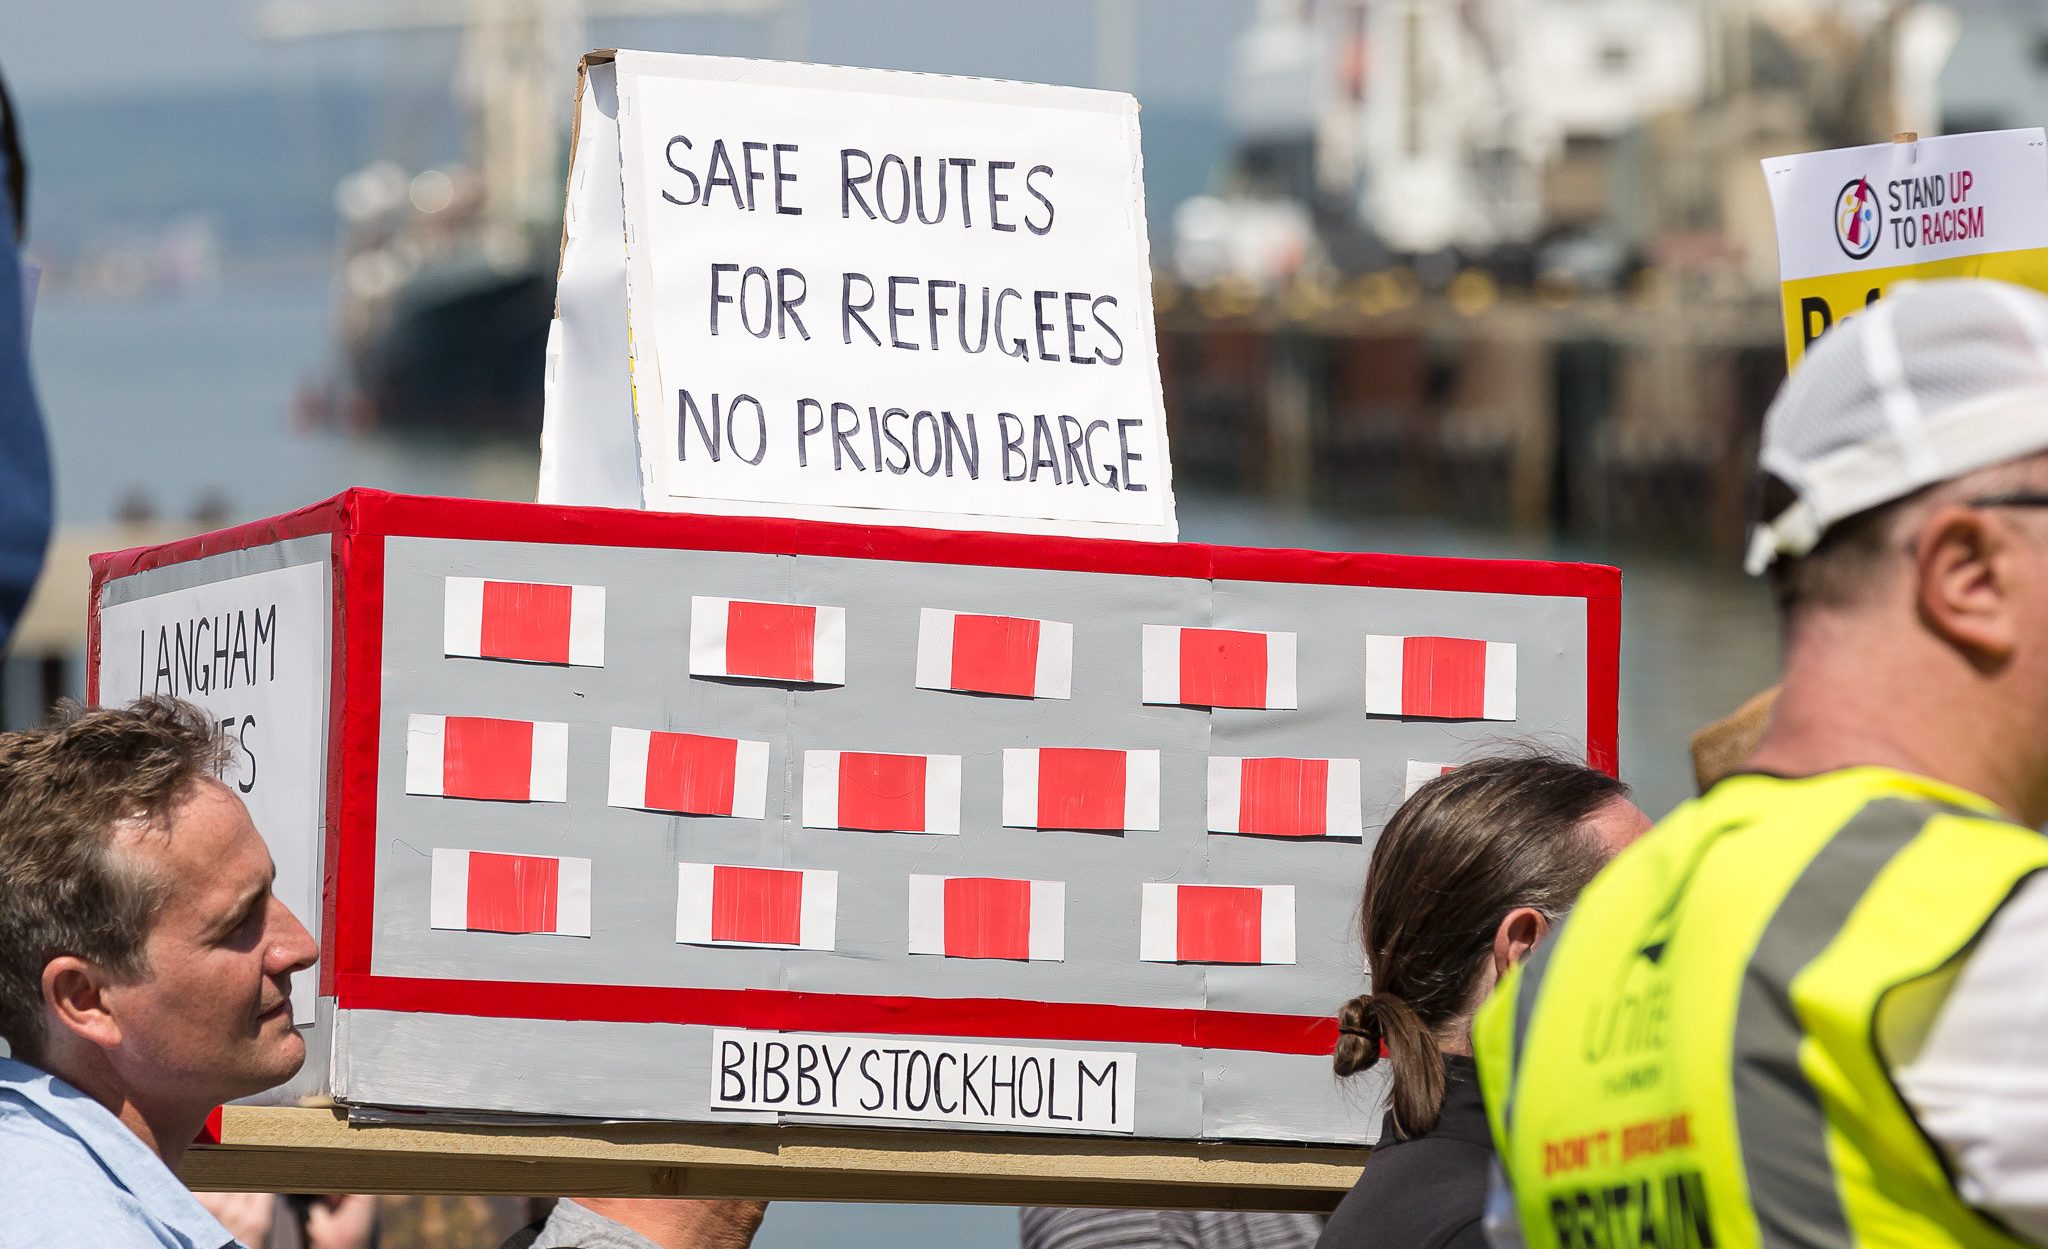 Placard saying safe routes for refugees, no prison barge, on top of a protest mock barge called Bibby Stockholm, at protest in Dorset against refugee barge and in solidarity with refugees.